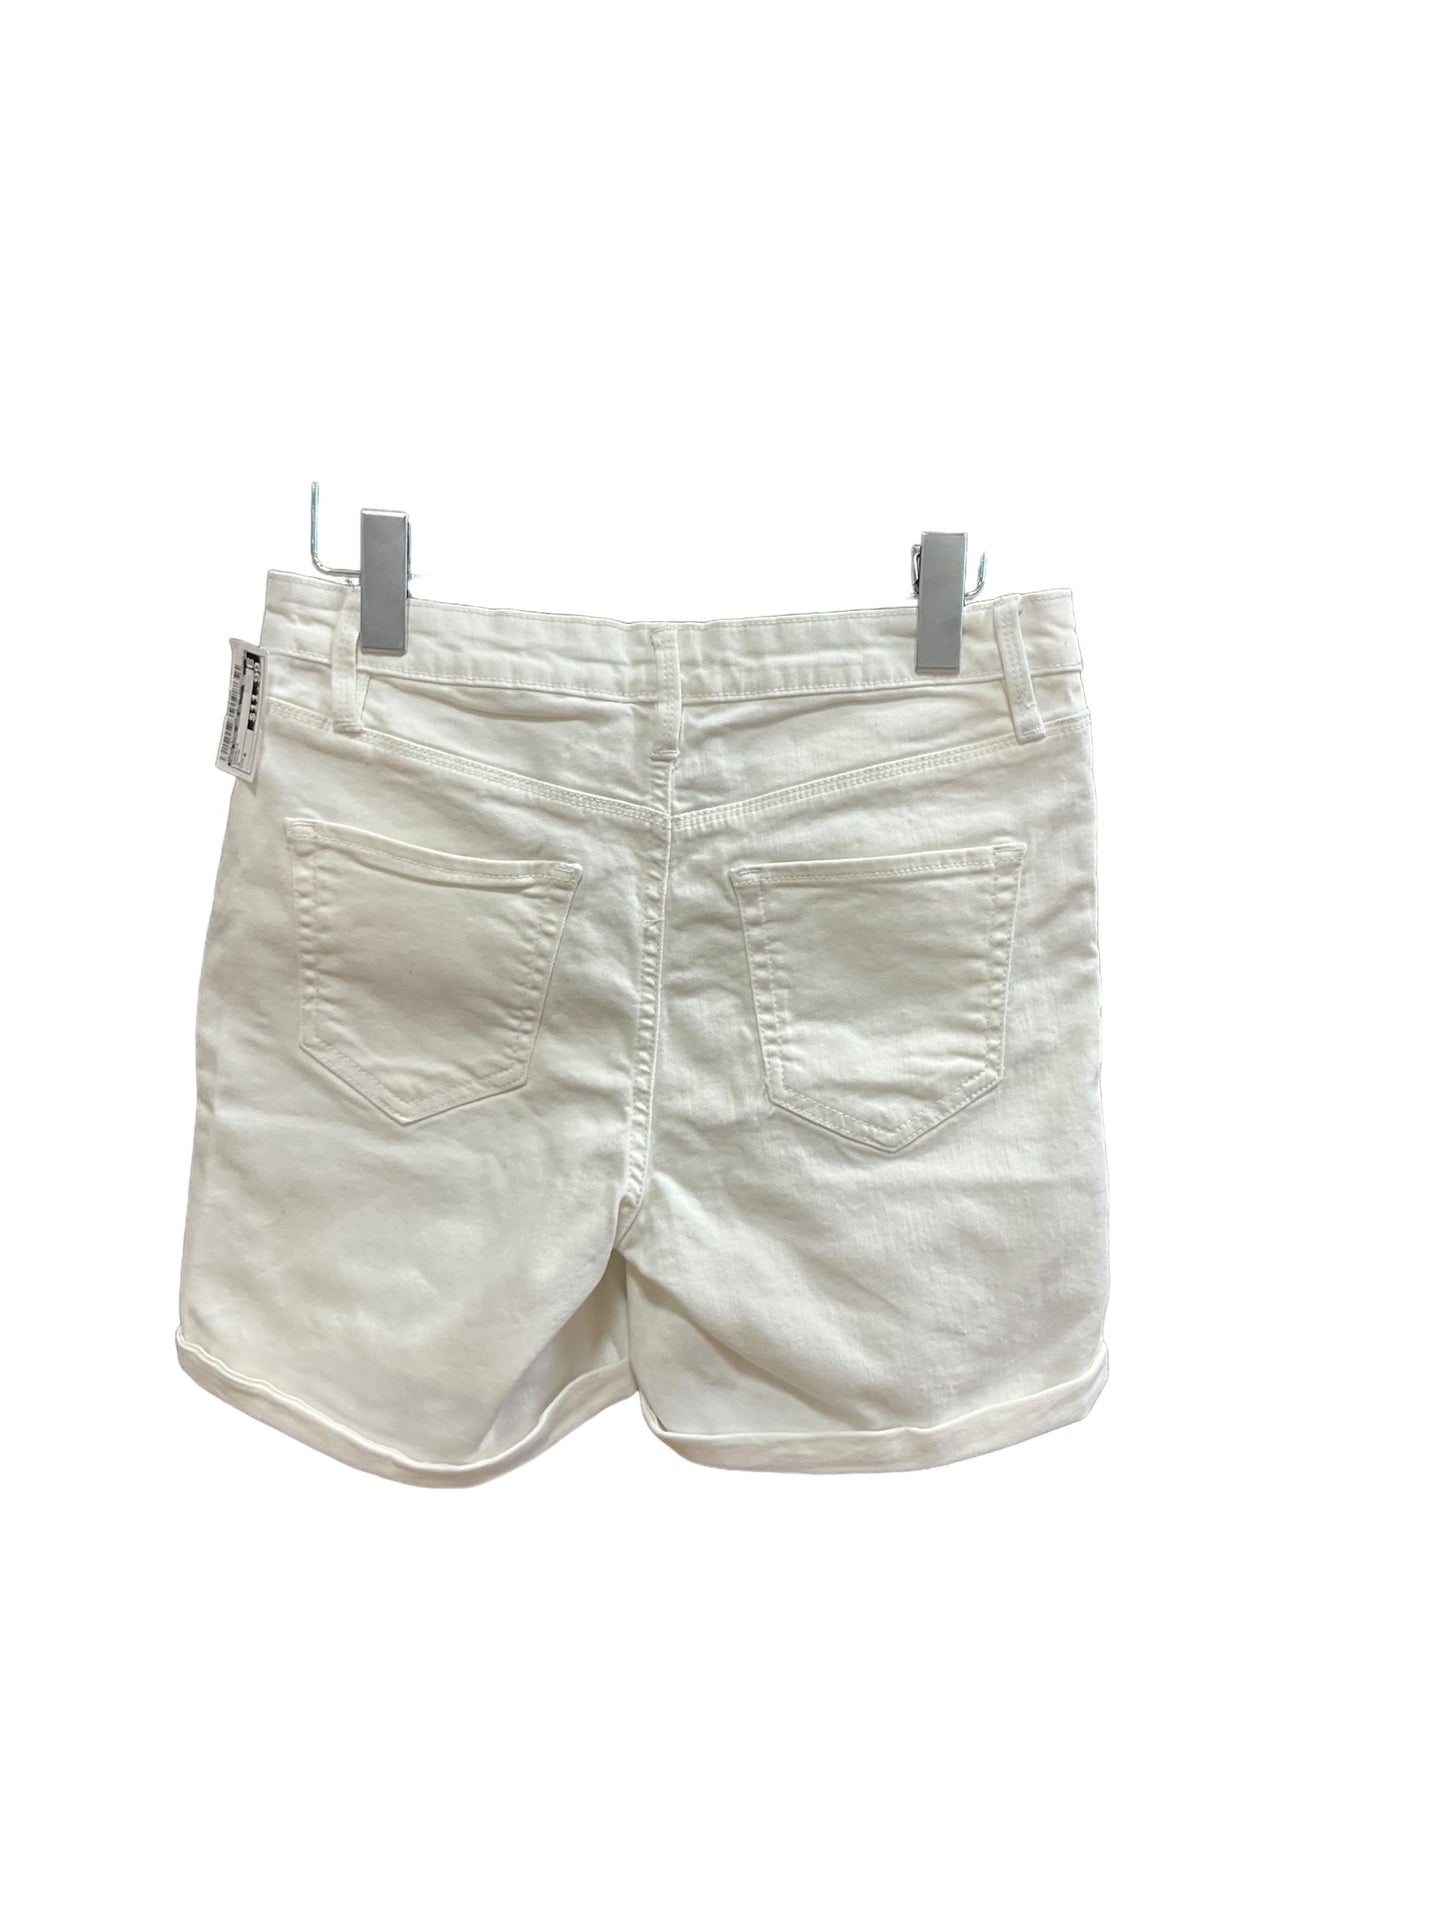 Cream Shorts New York And Co, Size 6